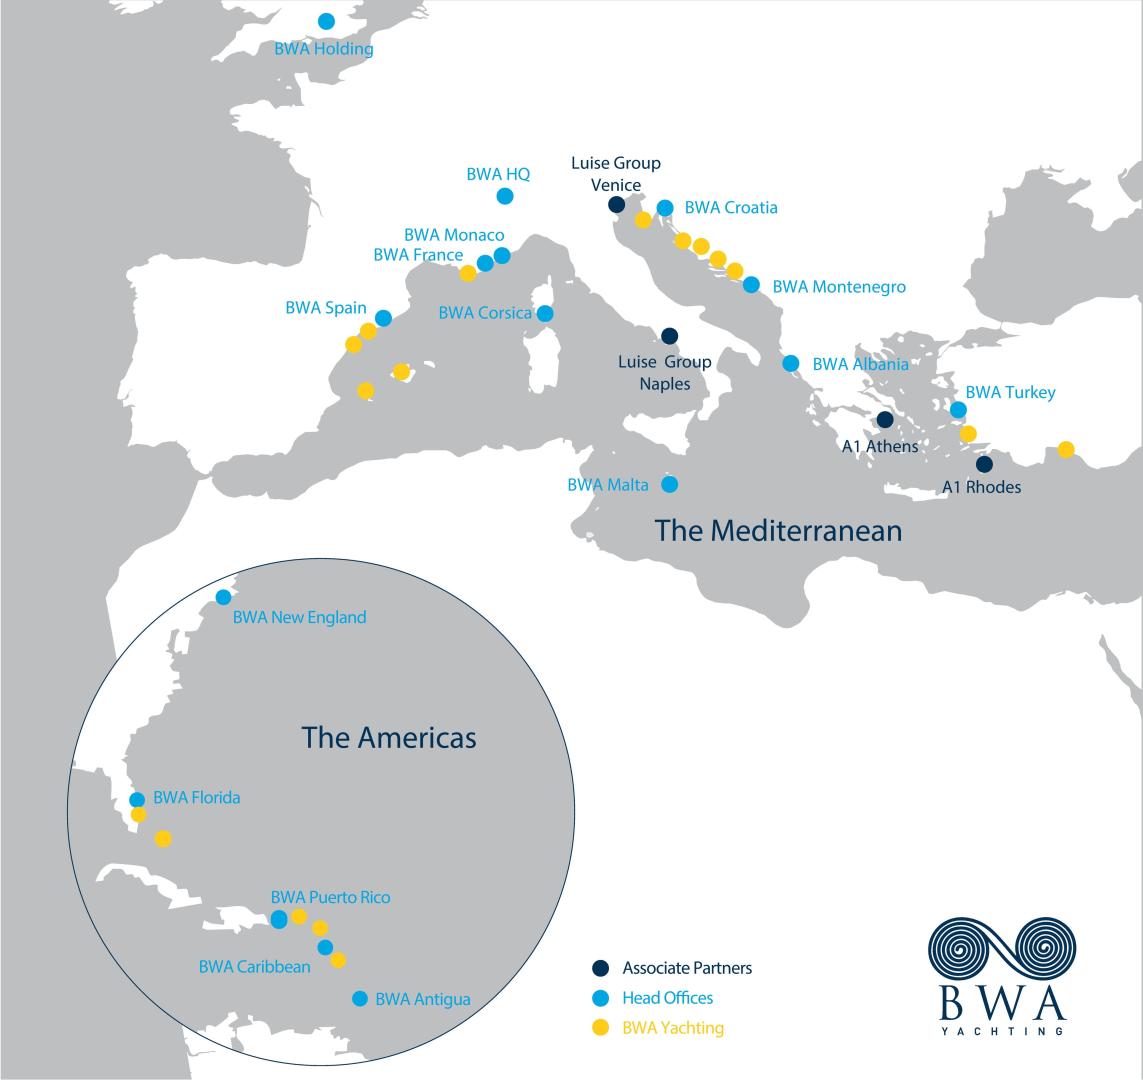 BWA Yachting extends Mediterranean network with A1 Yachting and Luise Group tie ups